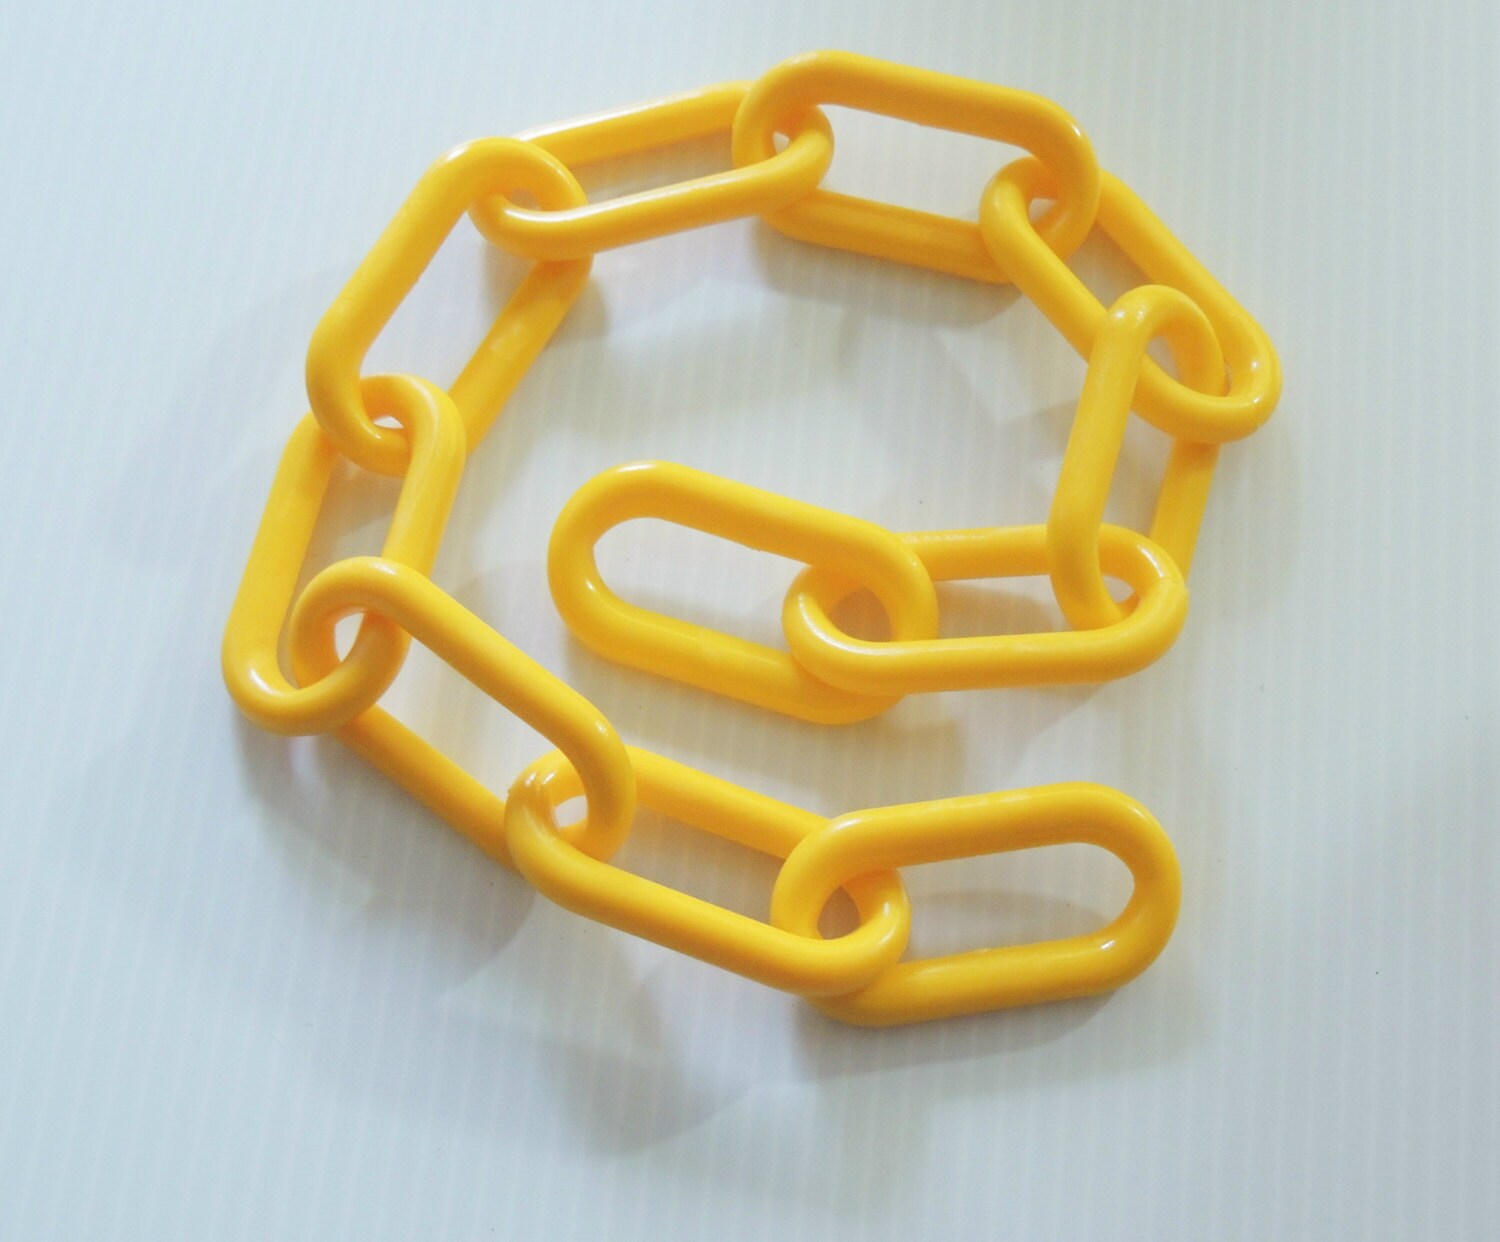 2' YELLOW Plastic Chain 3 bird toy parts for